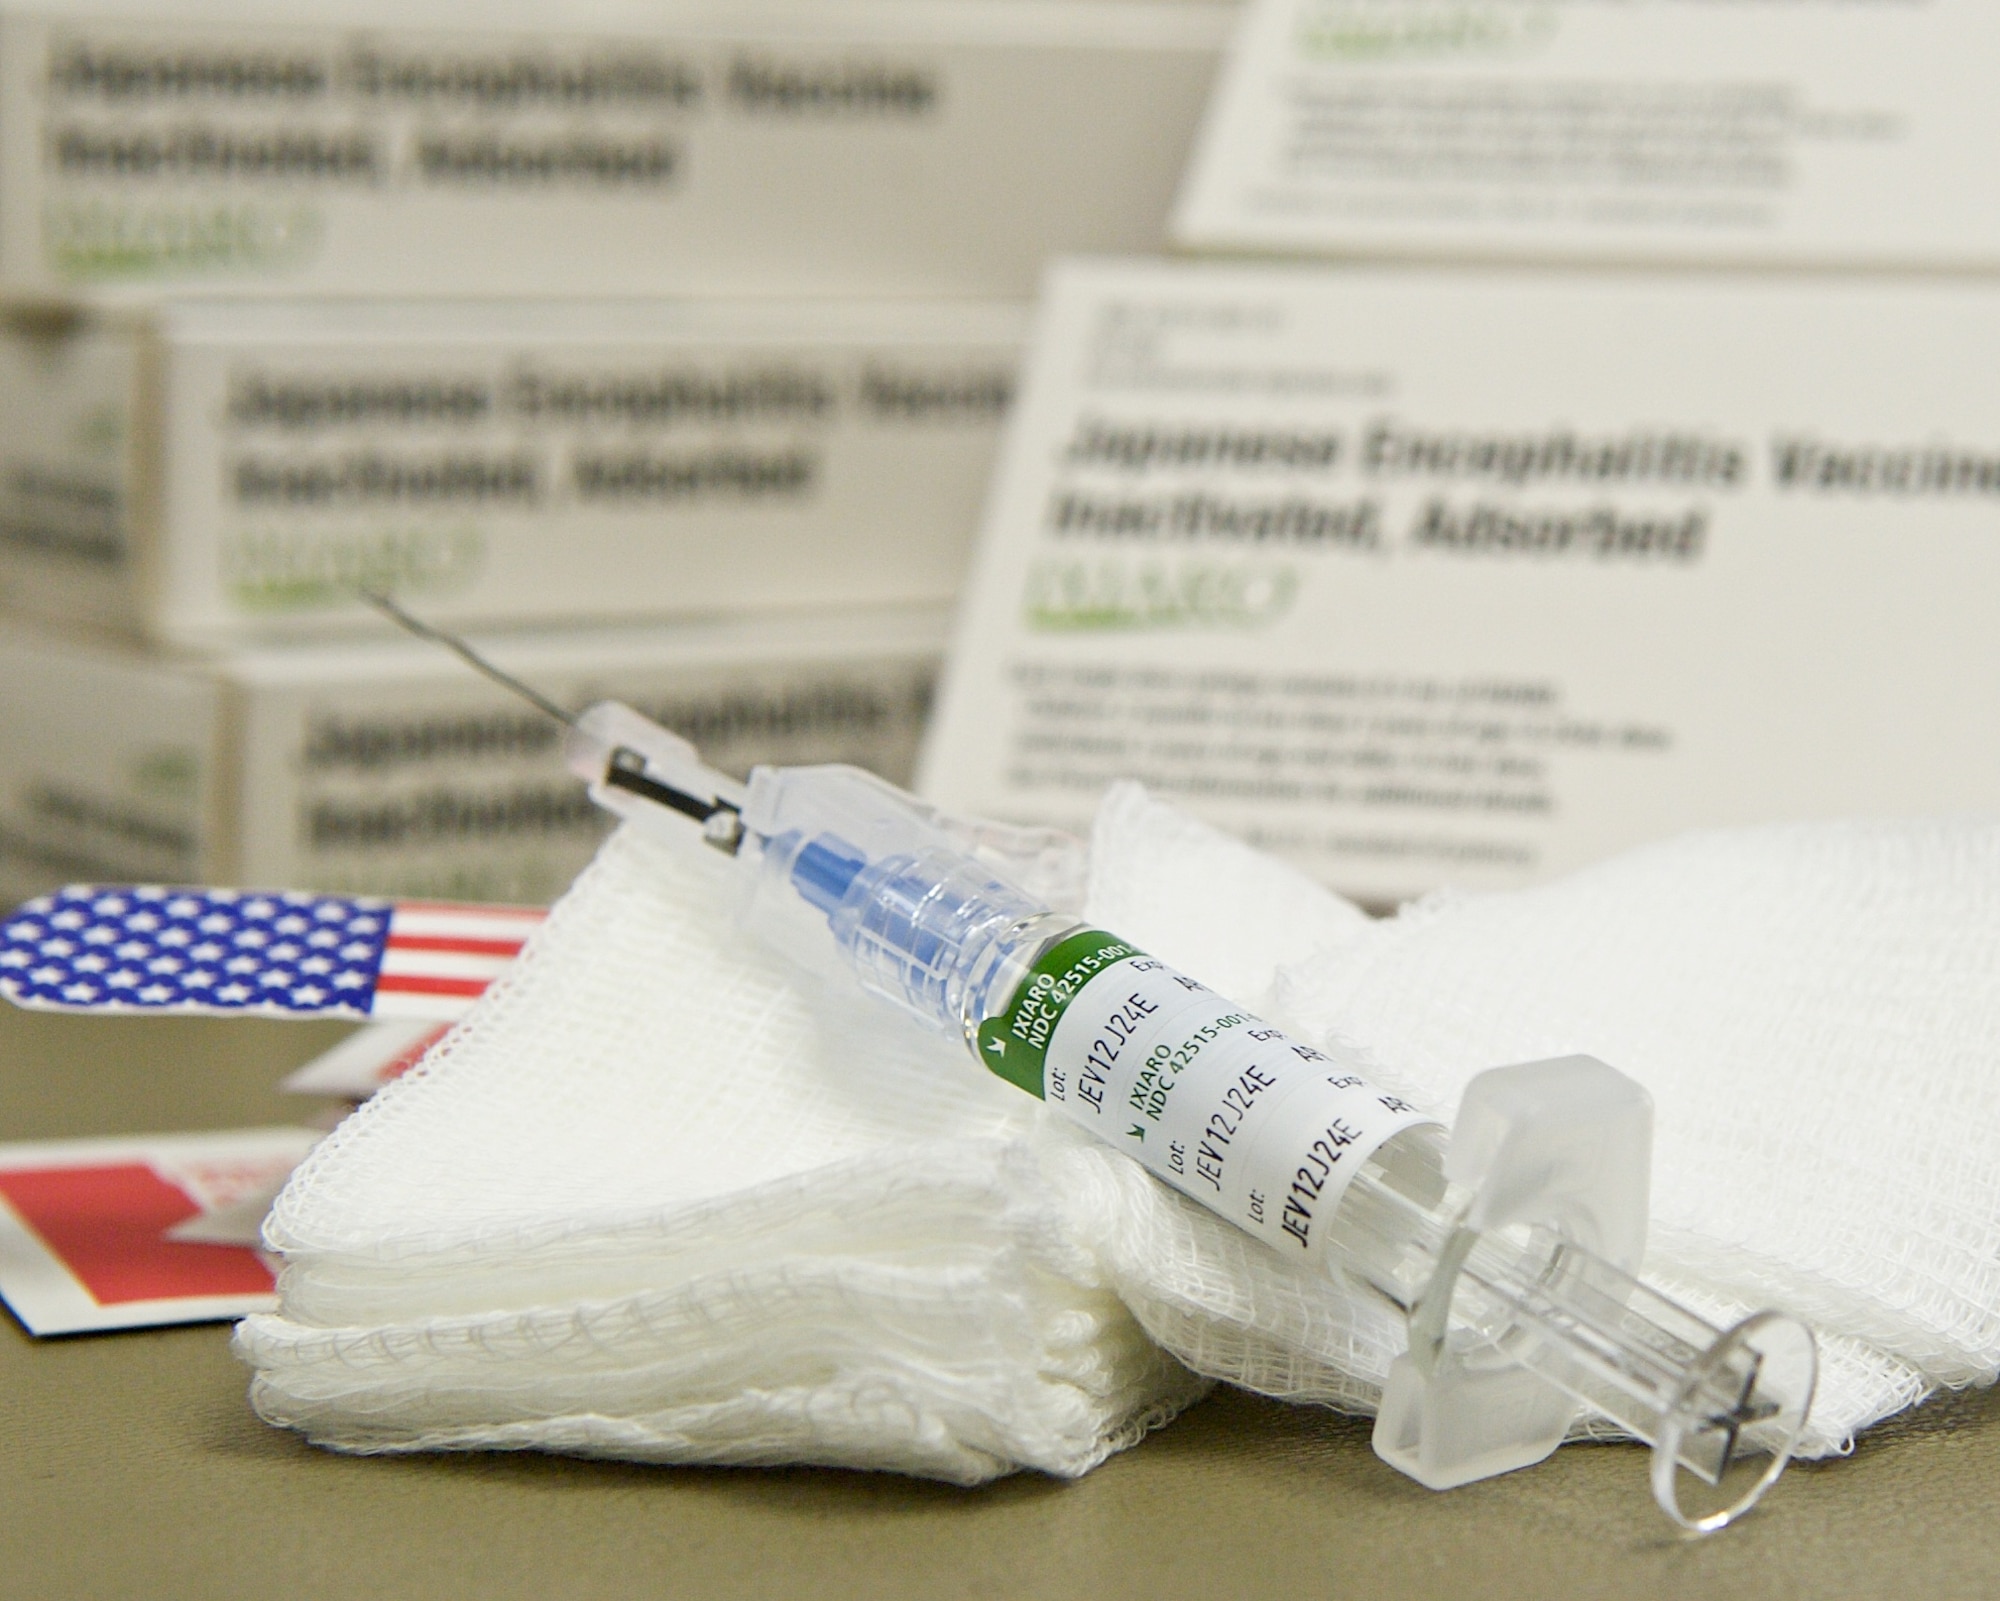 A Japanese encephalitis vaccination is now mandatory for active-duty Airmen stationed to or traveling for 30 days or more in the South Korea or Japan. While the likelihood of contracting the disease is low, the Air Force Surgeon General mandated the vaccine as part of their continuing efforts to protect and defend Airmen and their families from public health threats. (U.S. Air Force photo/Tech. Sgt. James Stewart)